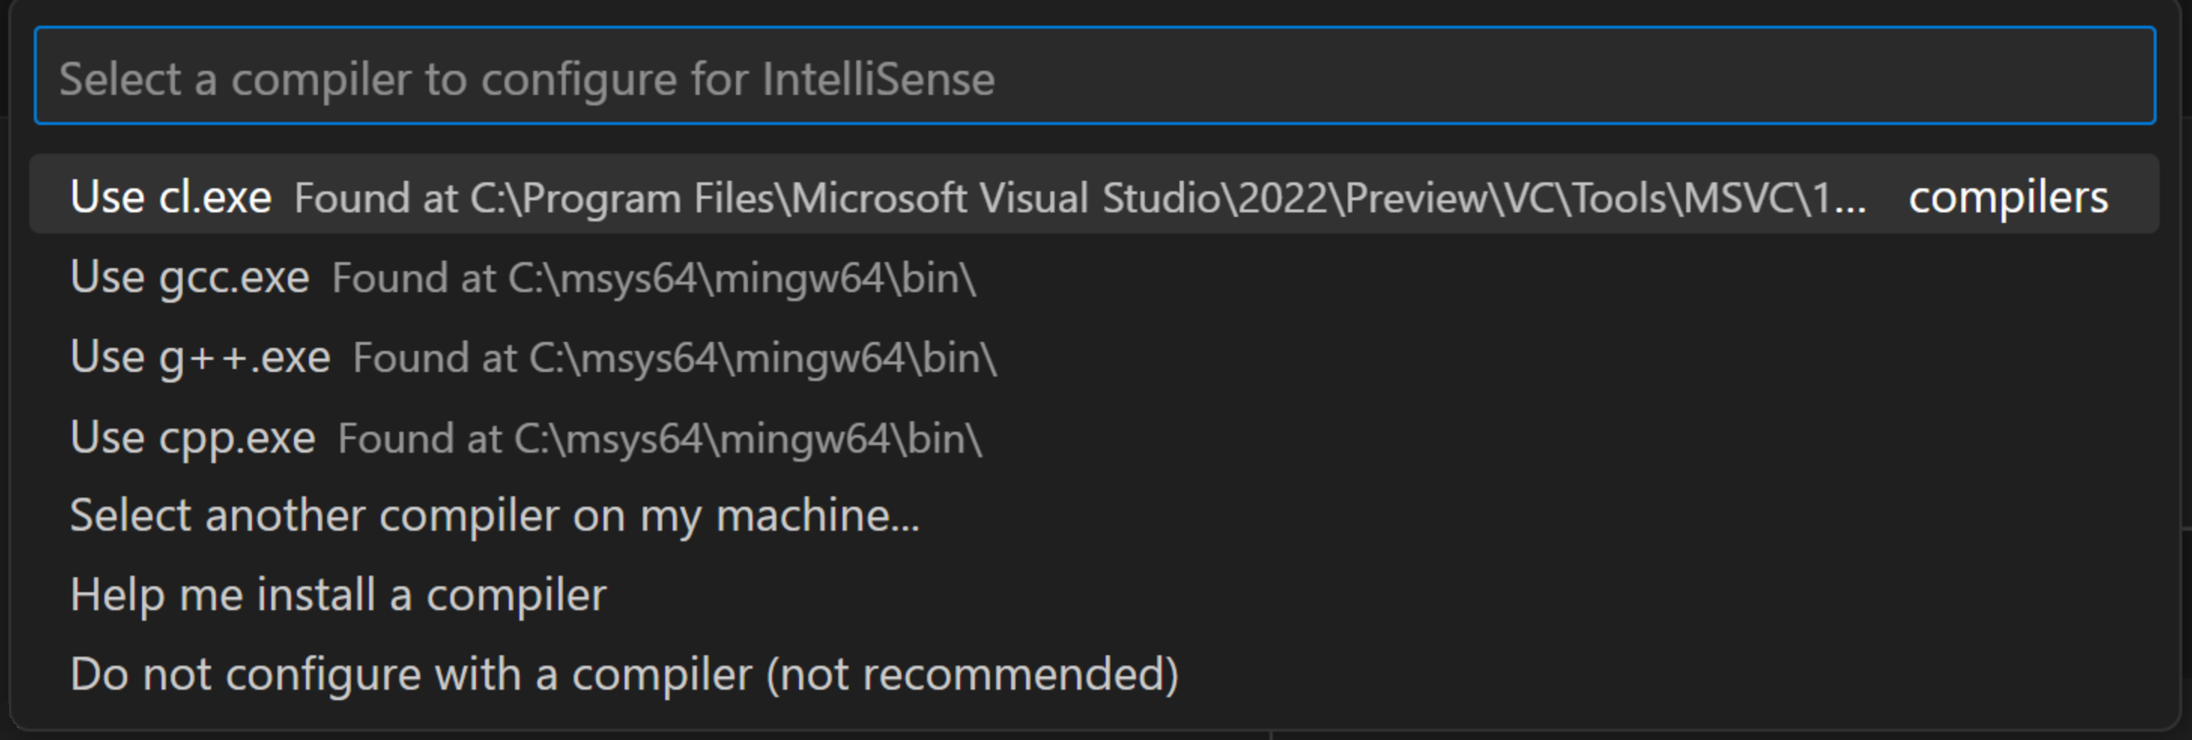 Select a compiler to configure for IntelliSense Quick Pick